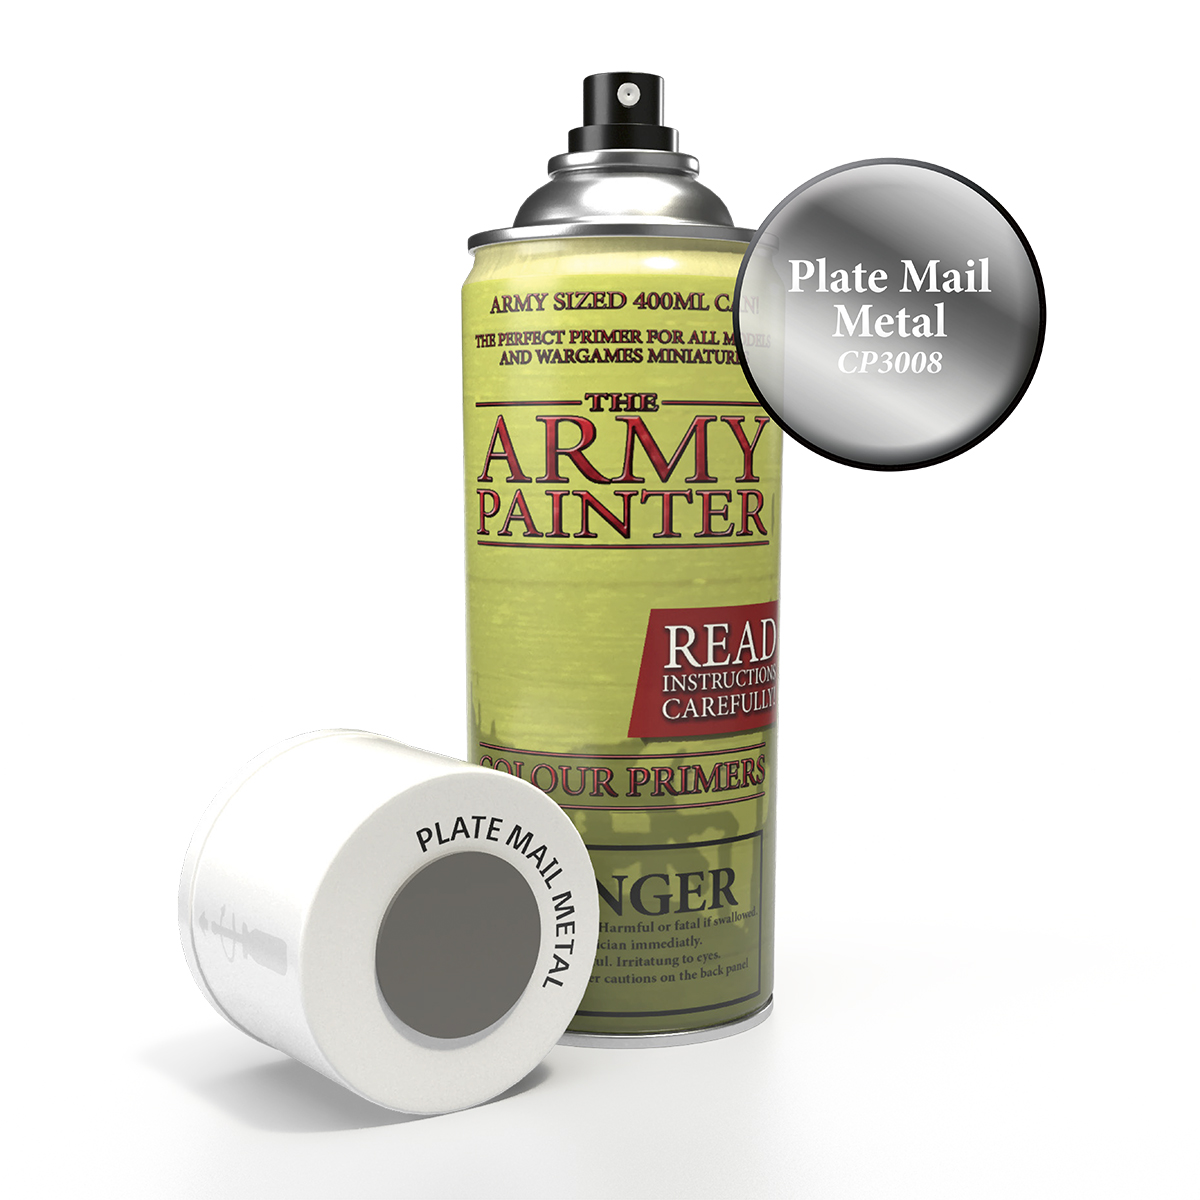 ArmyPainter Colorspray Plate Mail Metal